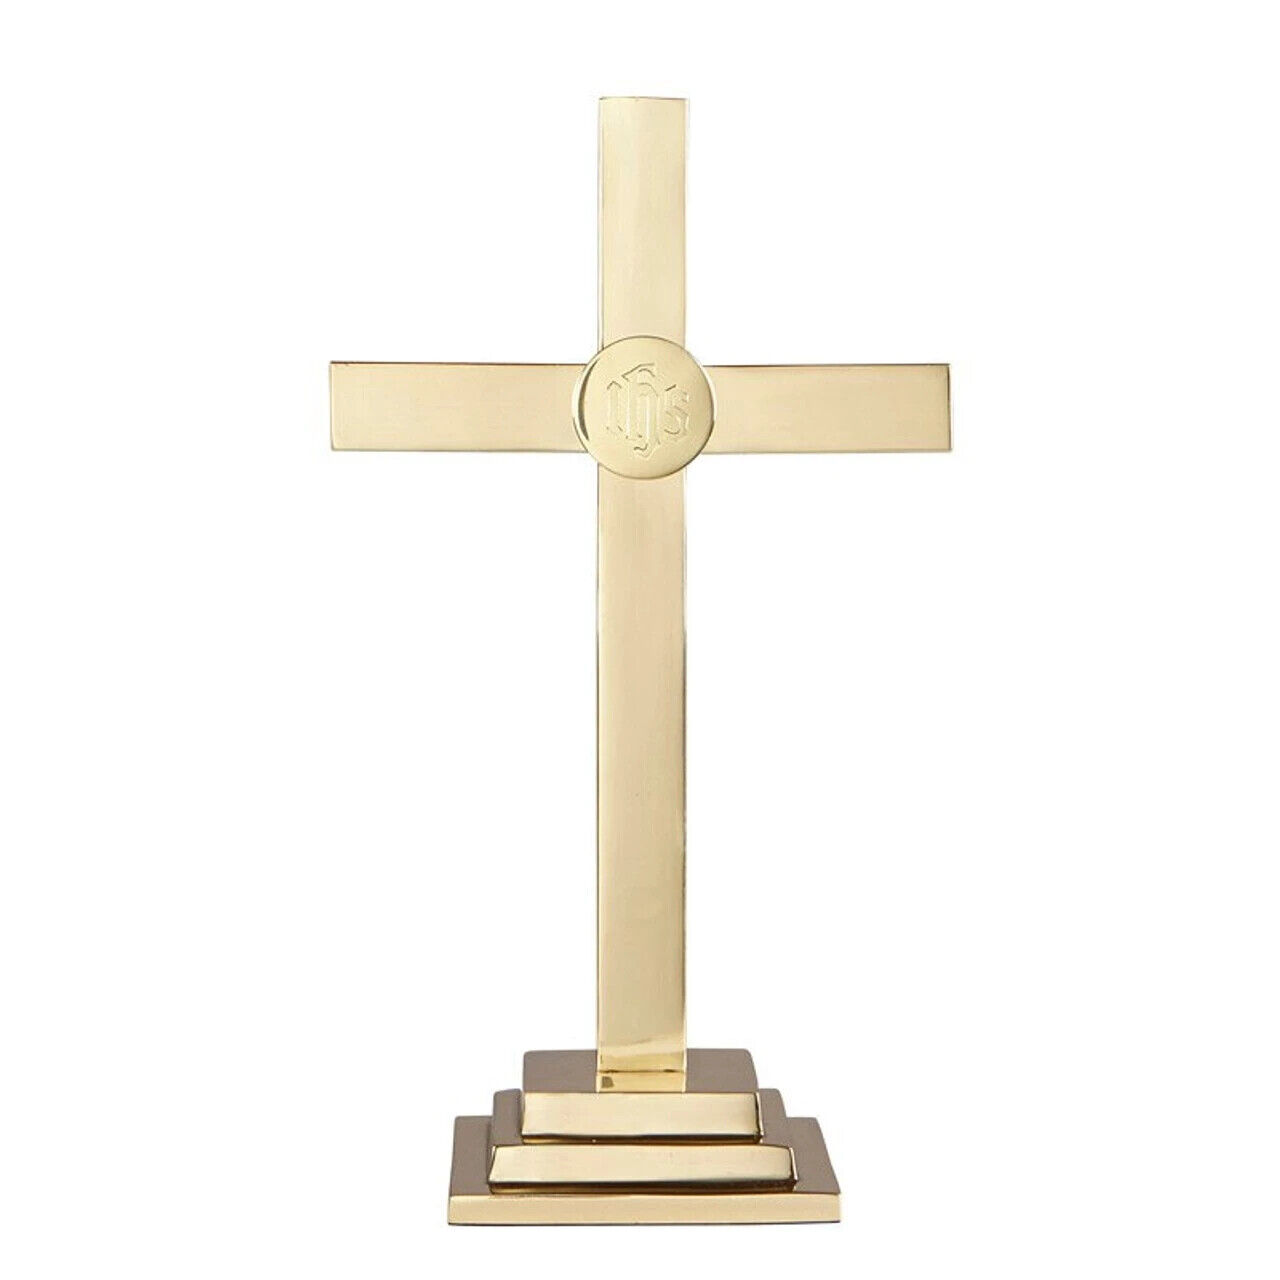 Solid Brass Classic IHS Emblem Altar Crucifix For Church Sanctuary Use 18 In